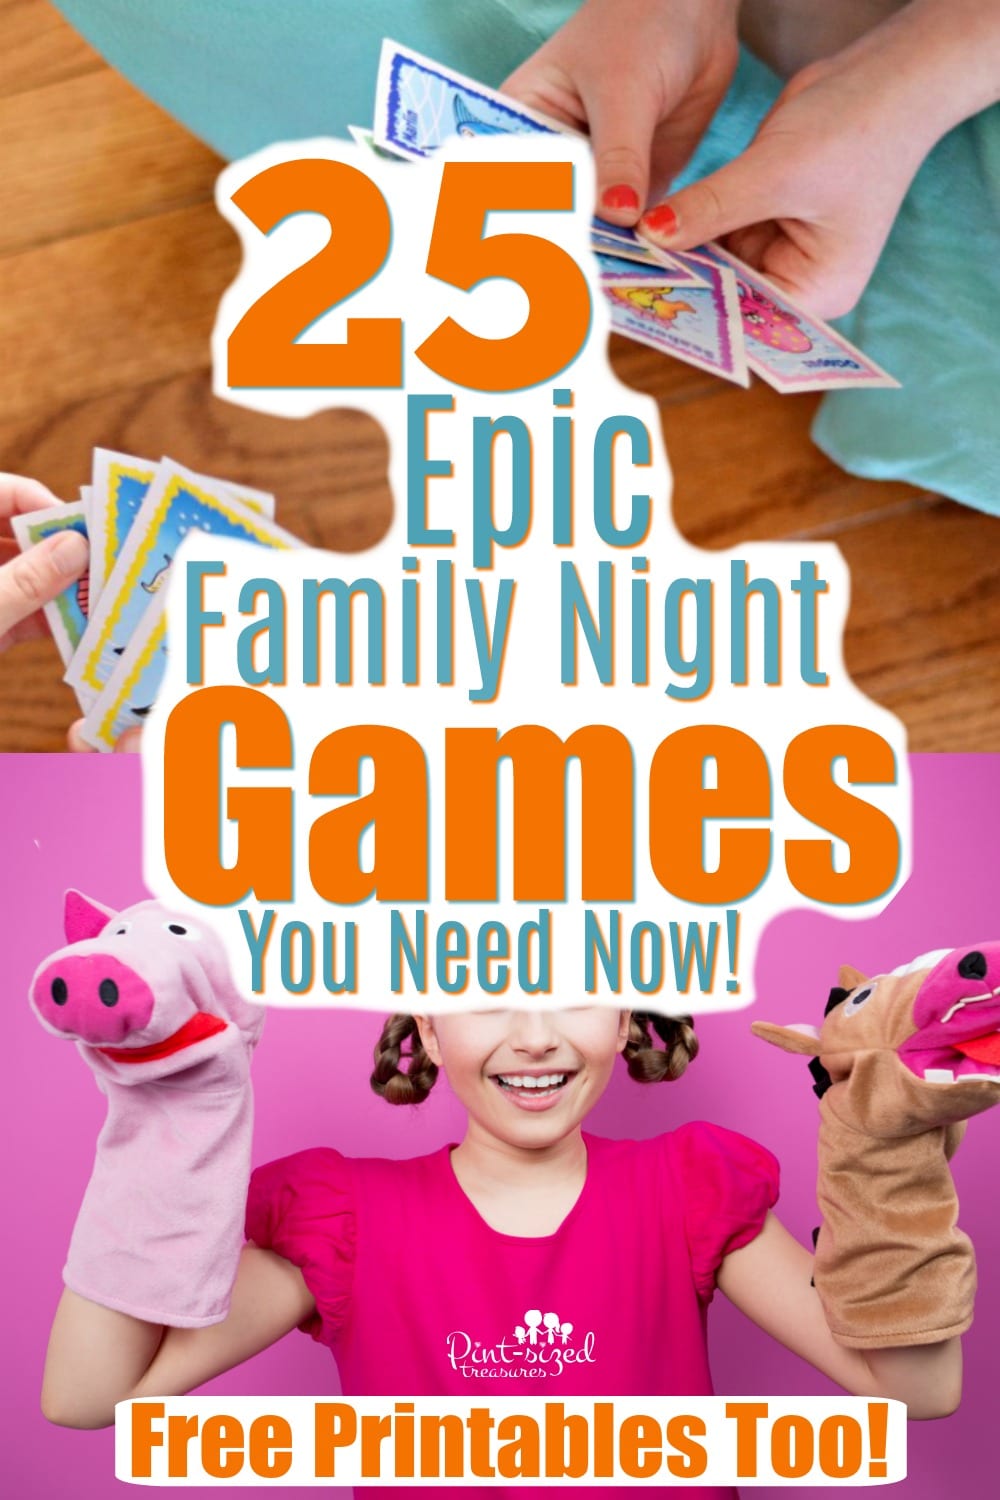 25 Super Epic Family Games for Family Night · Pint-sized Treasures